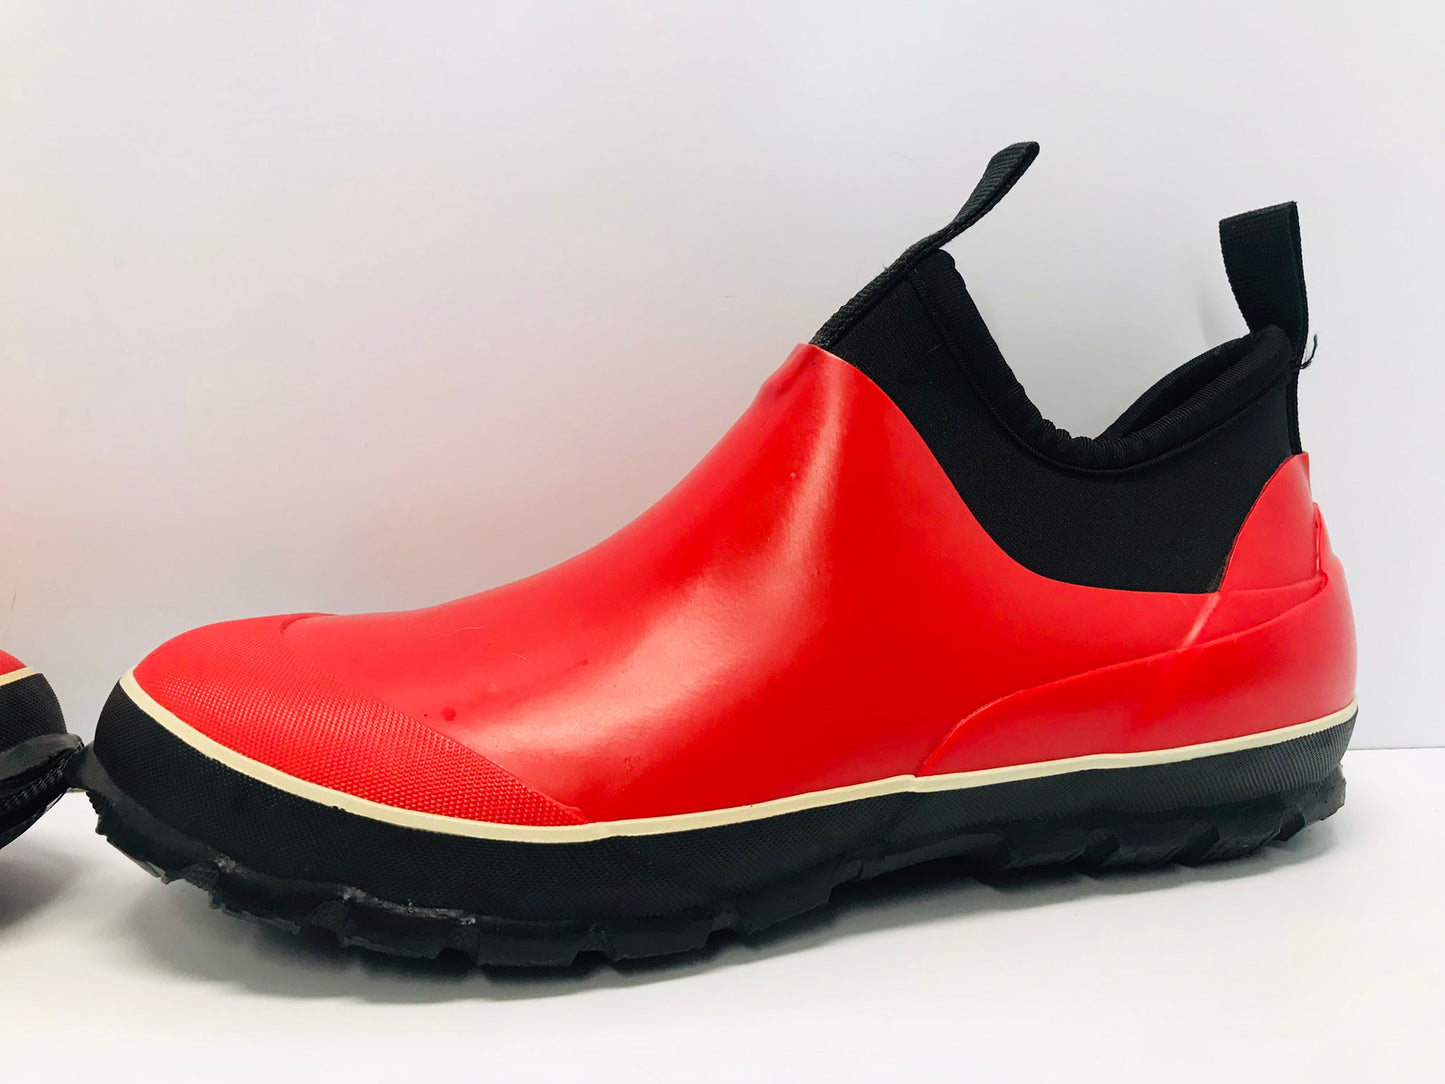 Rain Boot Shoe Ladies Size 8.5 Baffin Muck Pond Field Stream Waterproof Red Black Like New Worn Once Outstanding Quality